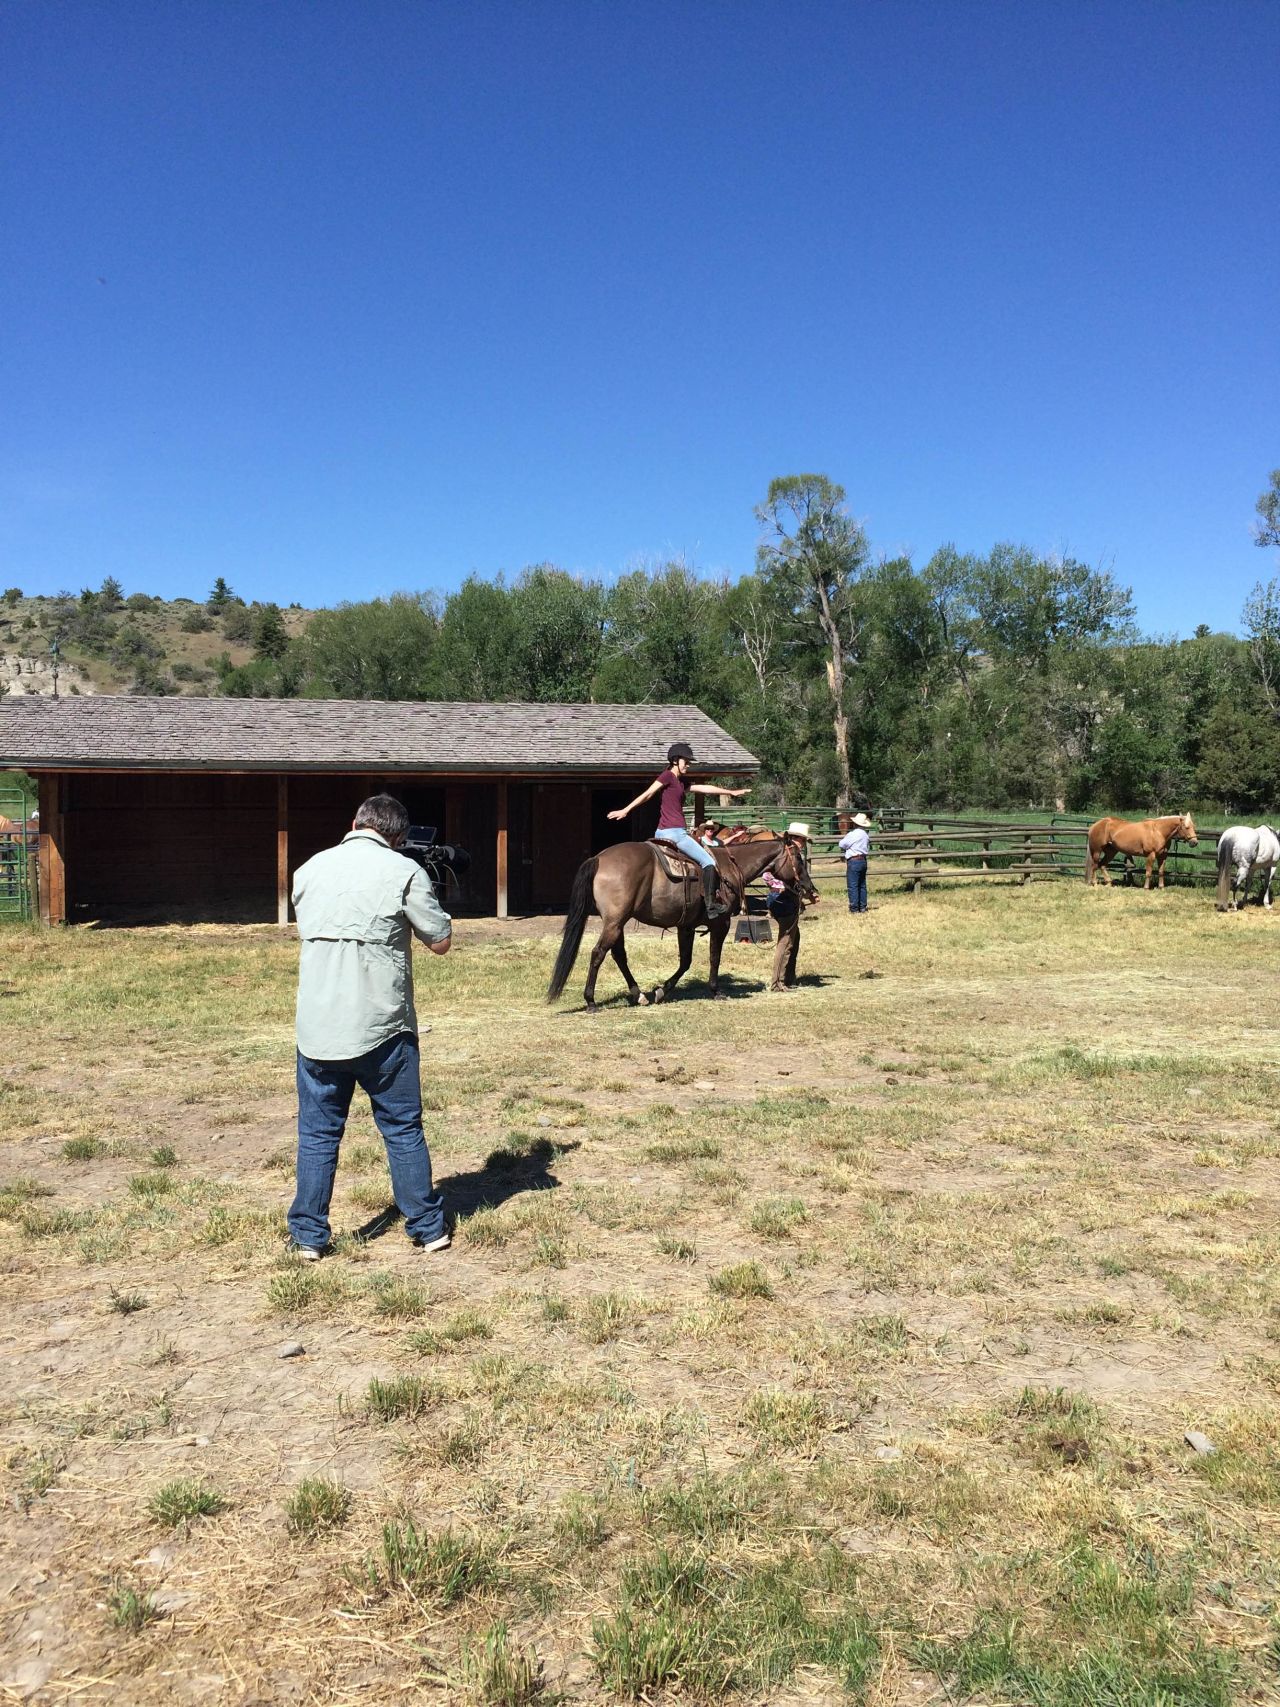 Retreats at Cowgirl Yoga include daily yoga sessions as well as time spent riding horses. Yoga provides the tools to be prepared to handle "whatever it is that comes your way," says company owner, Margaret Burns Vap. 